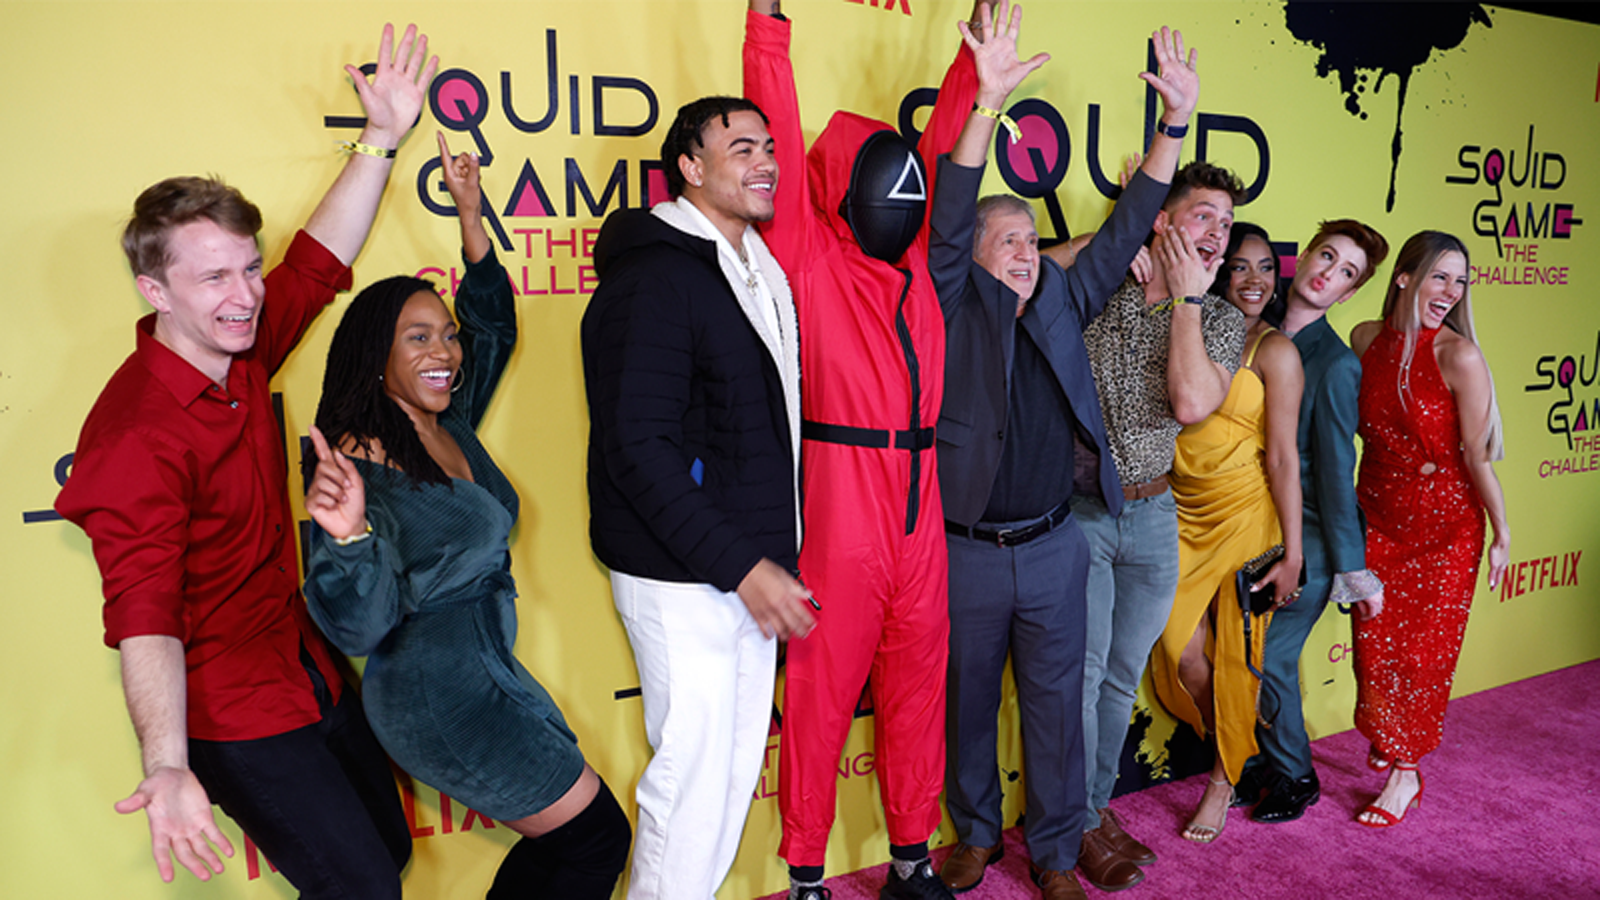 ‘Squid Game: The Challenge’ Accused Of Rigging The Outcomes Of Some Games